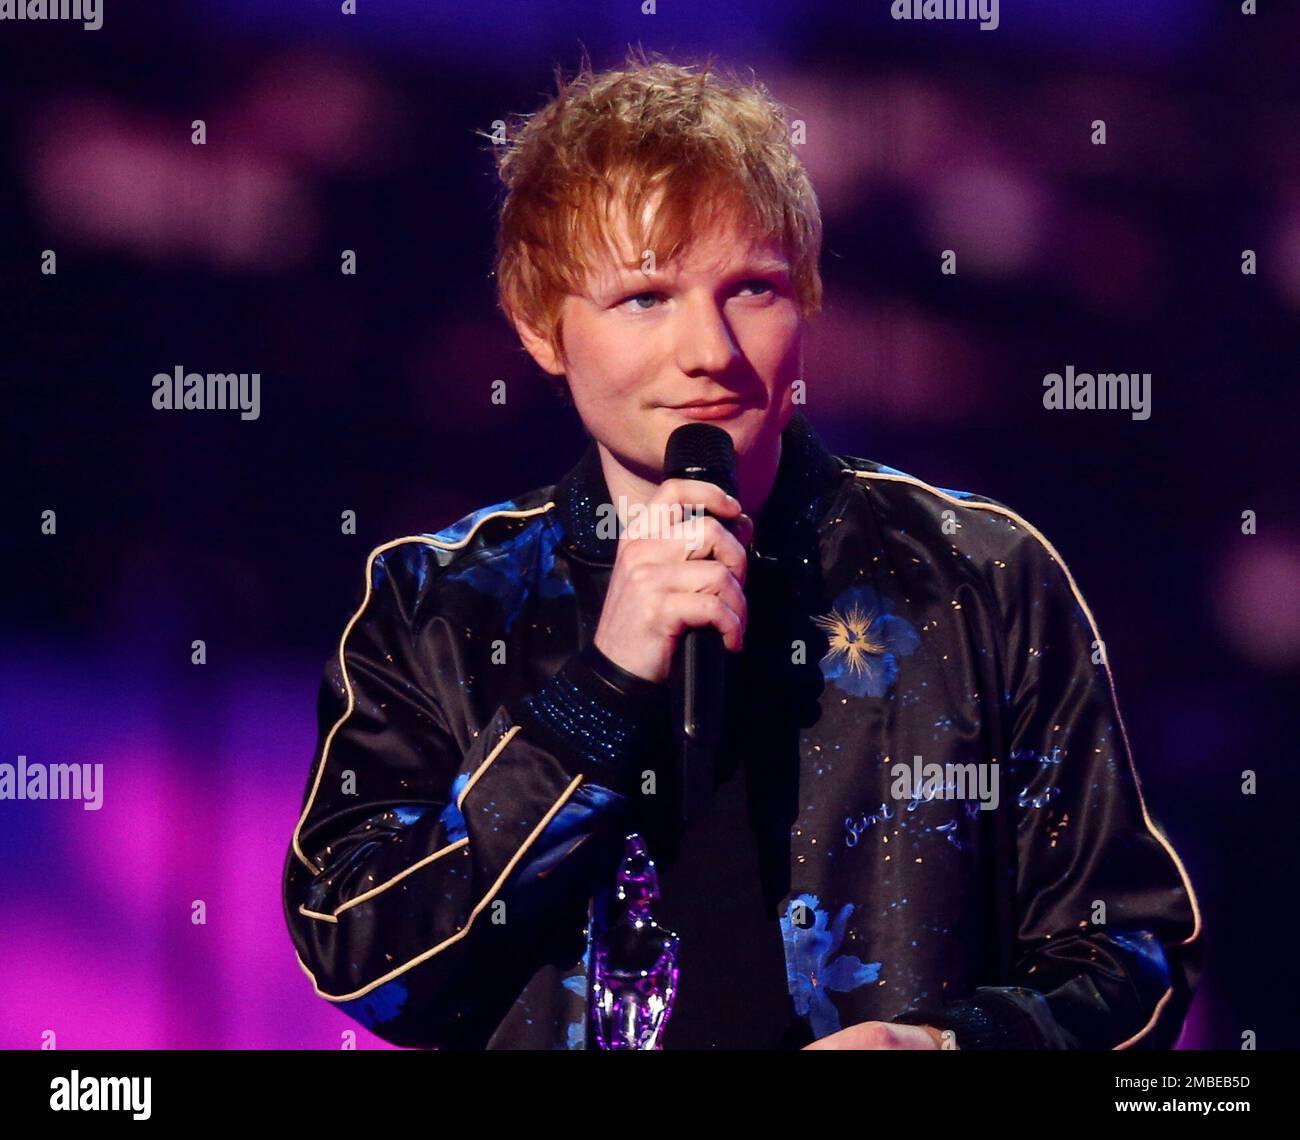 FILE - Singer Ed Sheeran appears on stage after winning songwriter of the  year at the Brit Awards 2022 in London on Feb. 8, 2022. Sheeran has  announced the birth of his